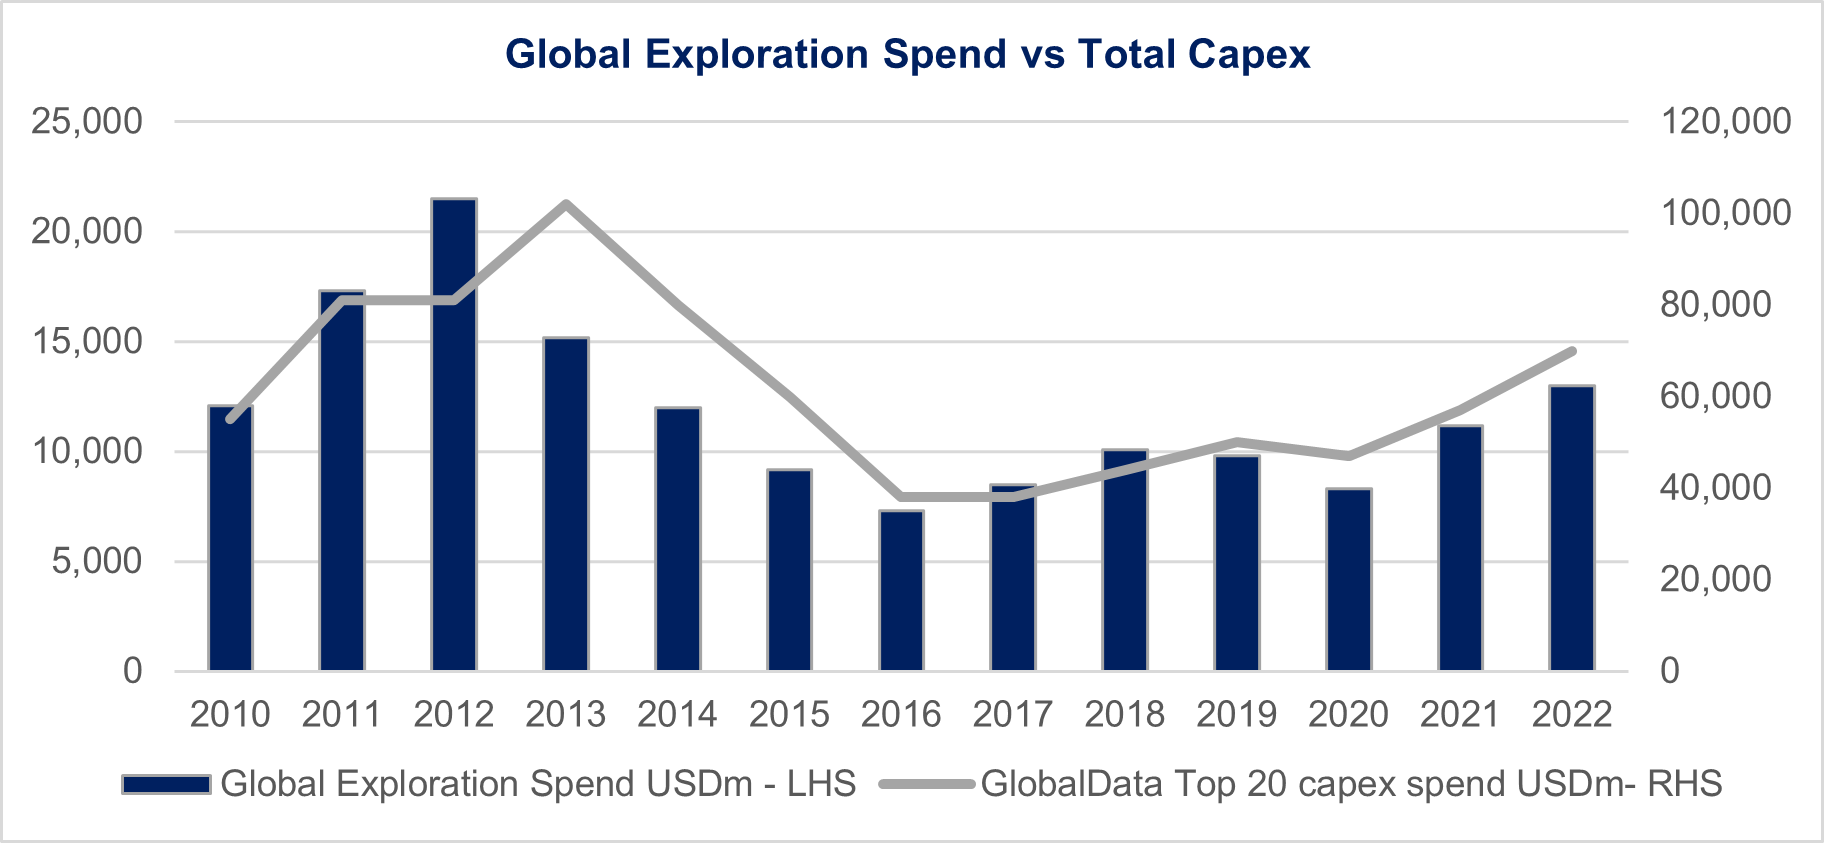 Sources: Chester Asset Management, S&P Global Intelligence and GlobalData, refer section on Lycopodium for copy of GlobalData graph this data relates to